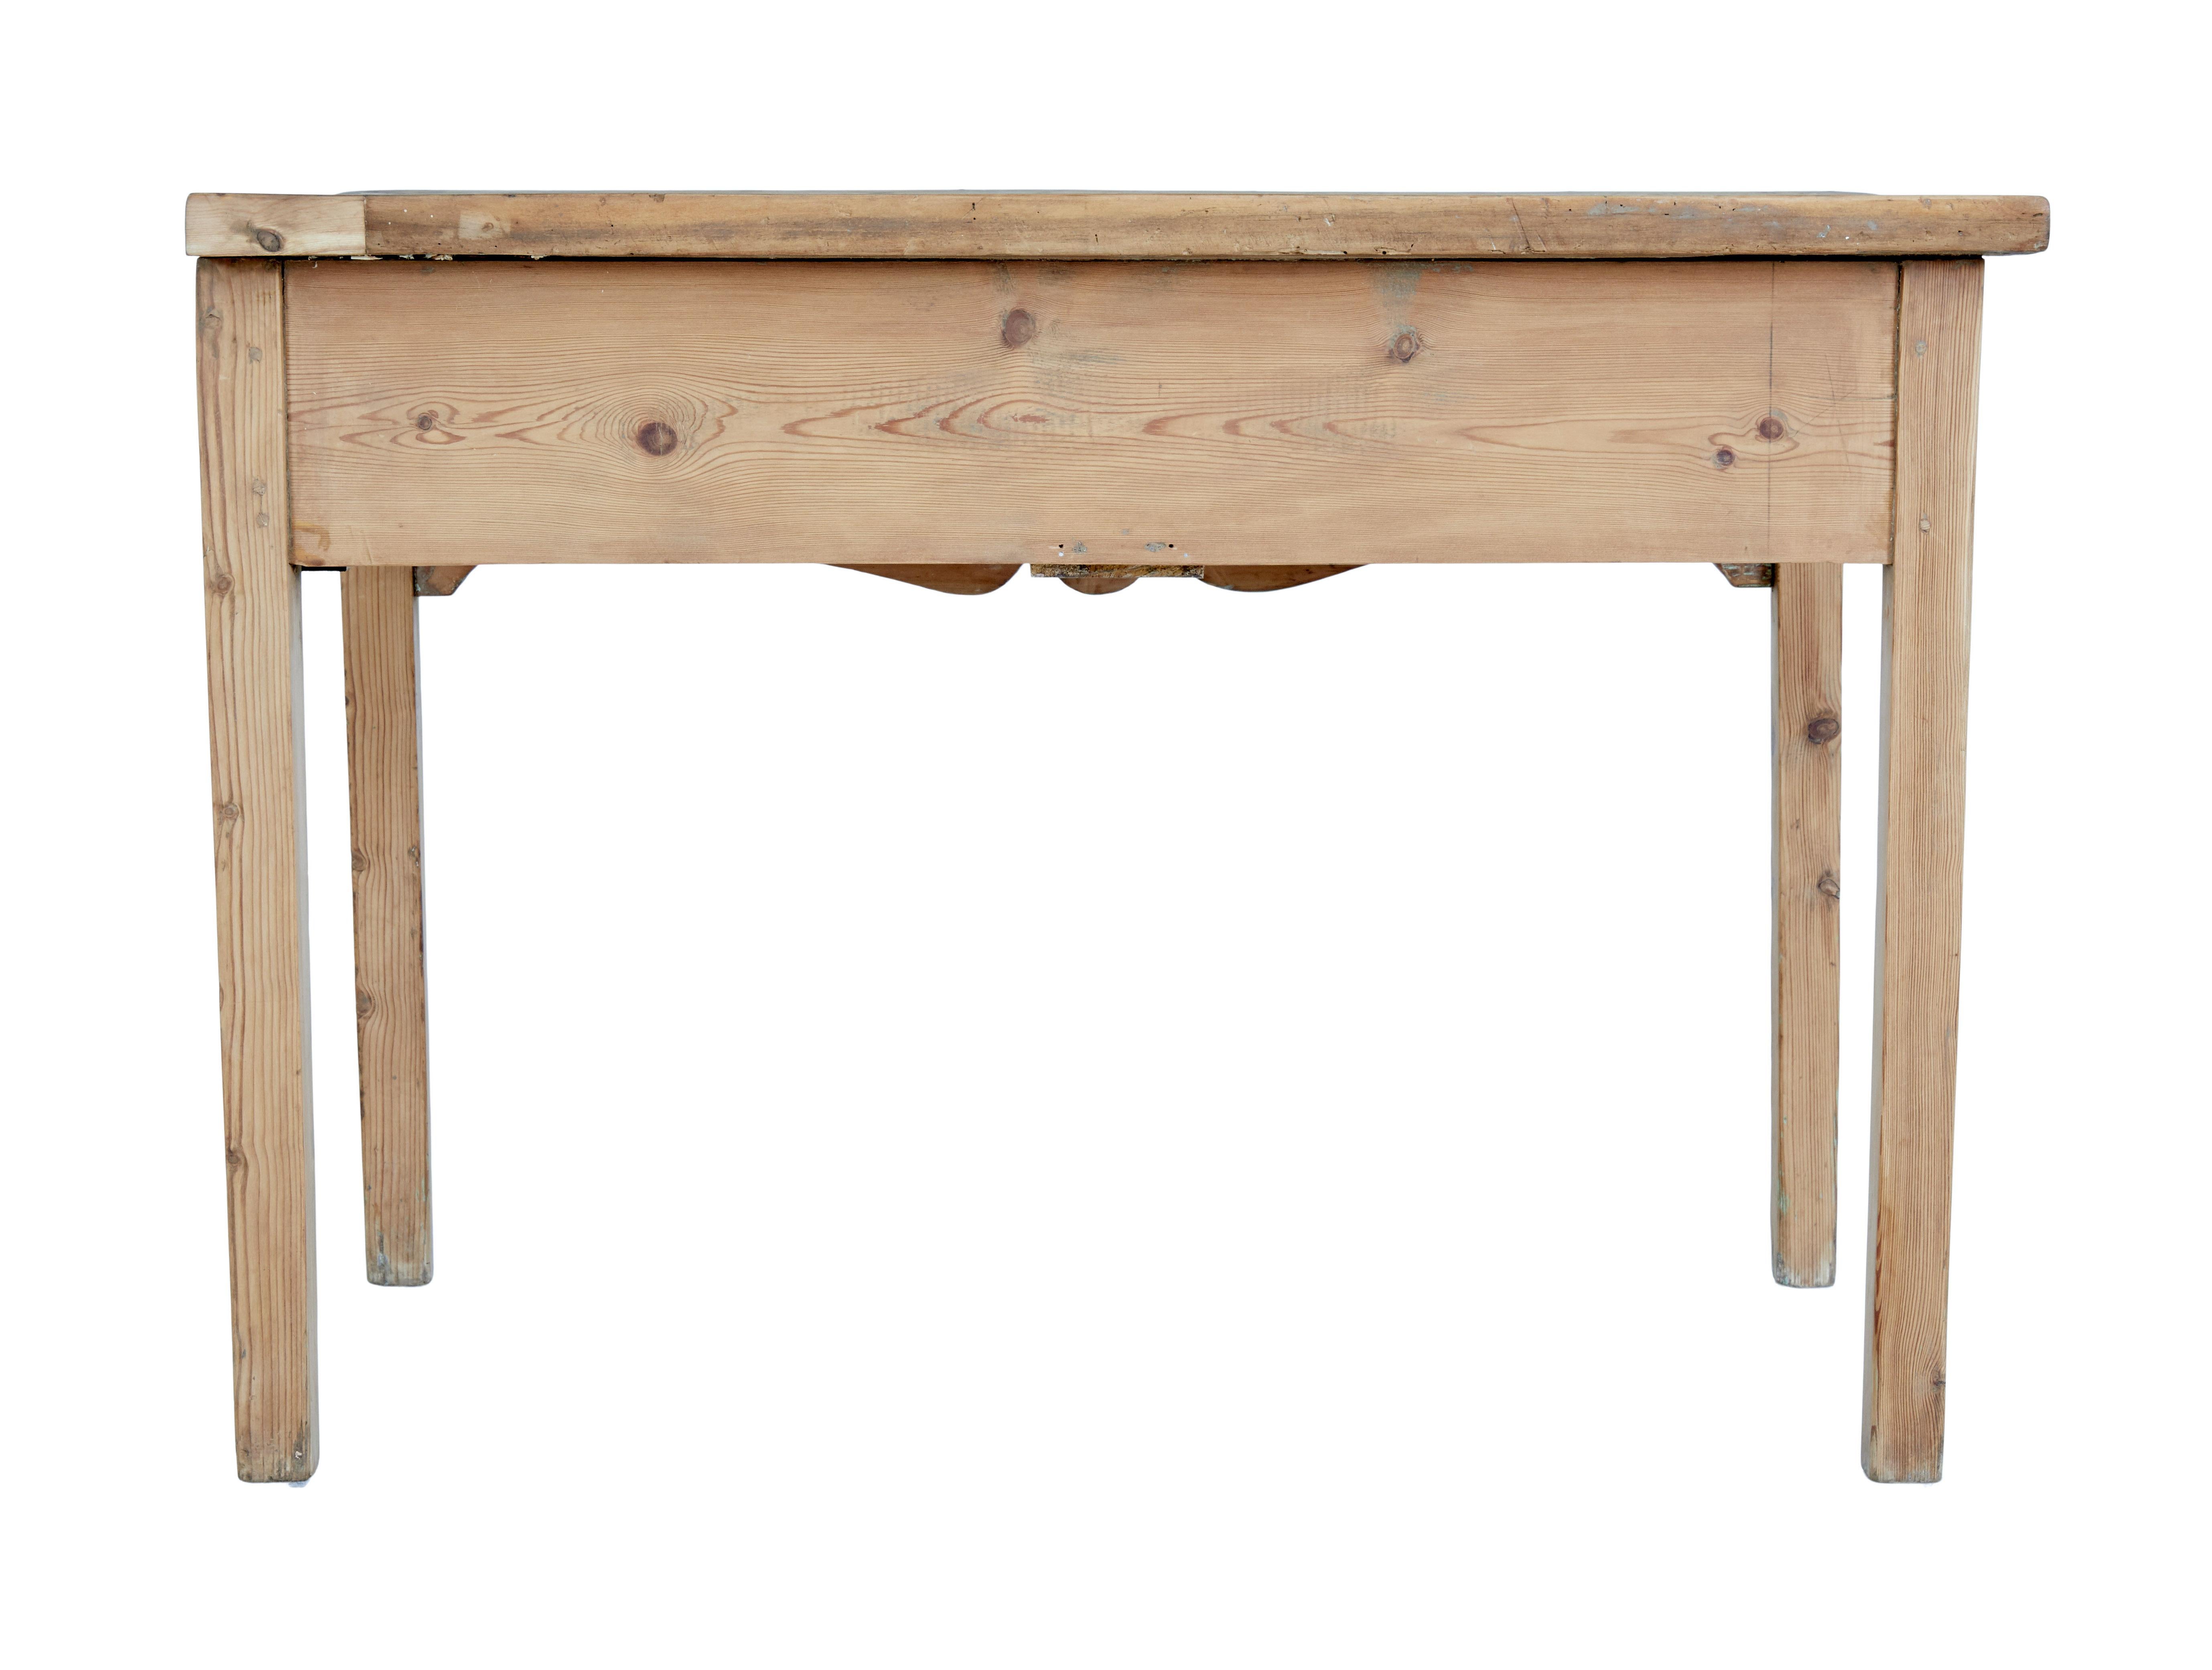 Rustic 19th Century Victorian Pine Kitchen Table 3